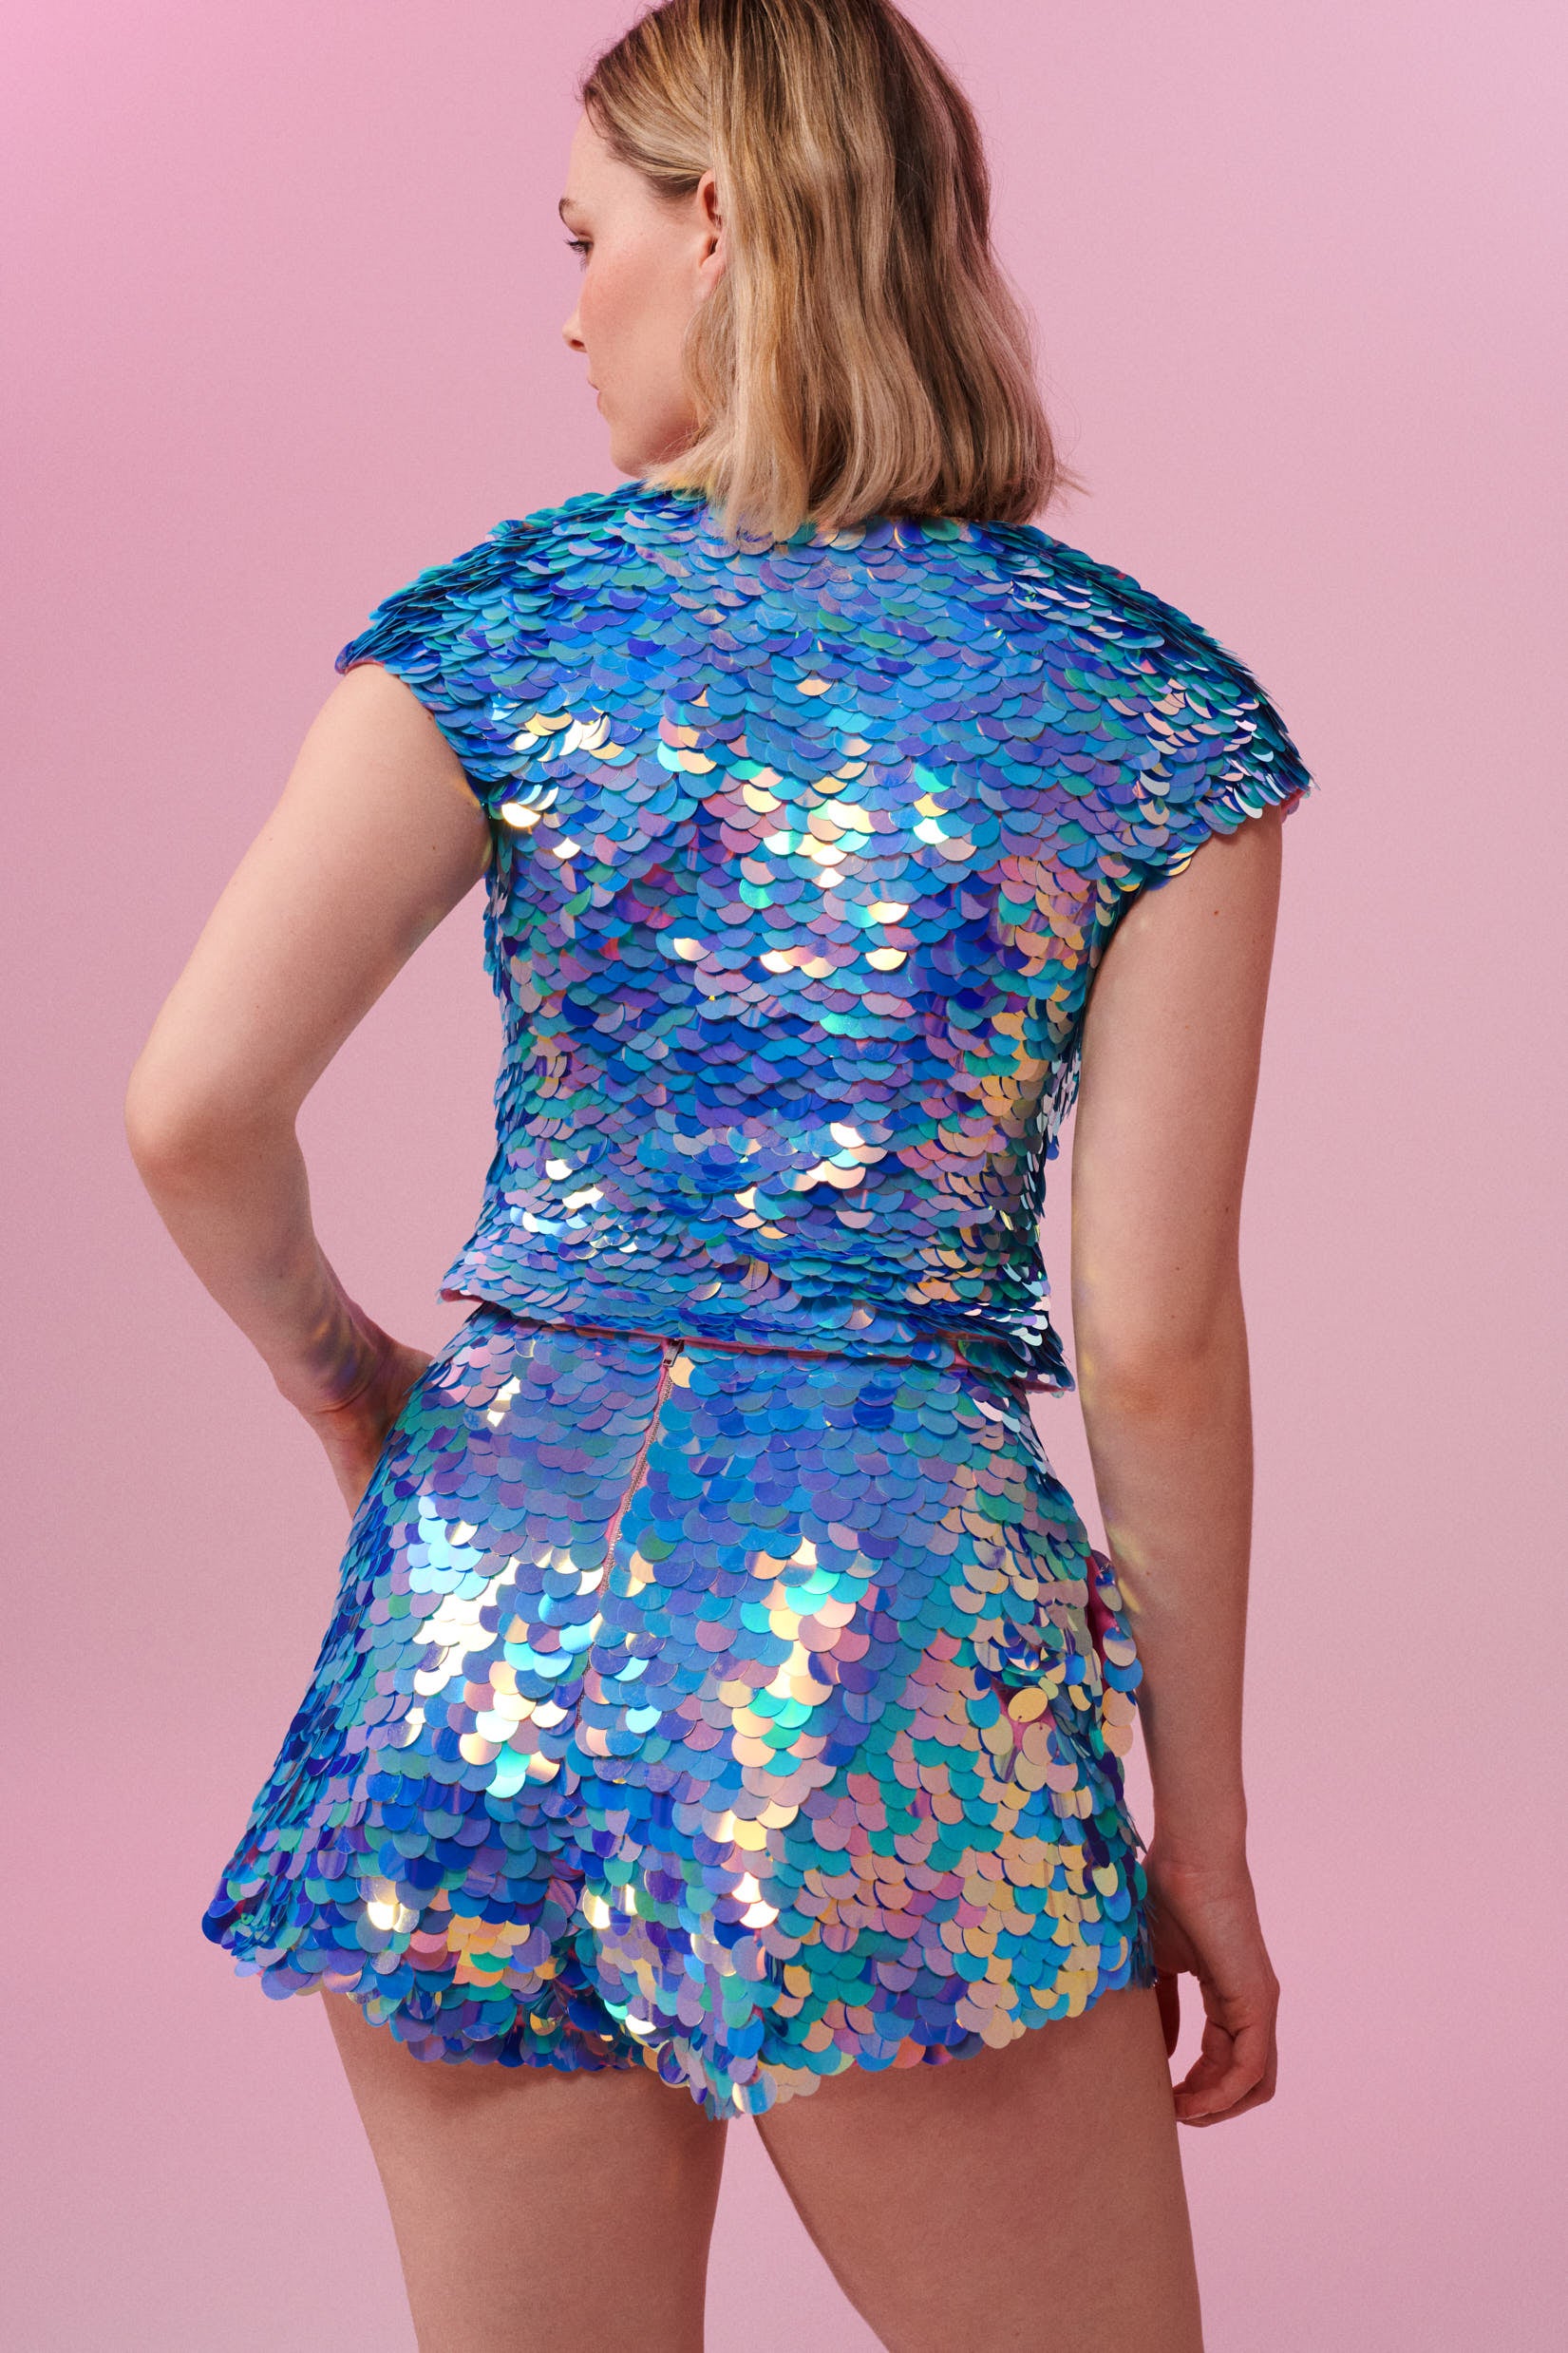 A rear view of a woman with short blonde hair, wearing high waisted festival sequin shorts and a matching sequin top made with large round holographic Rosa Bloom sequins. The Amethyst  sequins glisten in the light, creating a mix of shimmering colours of lilac purple, light blue and soft pinks. 